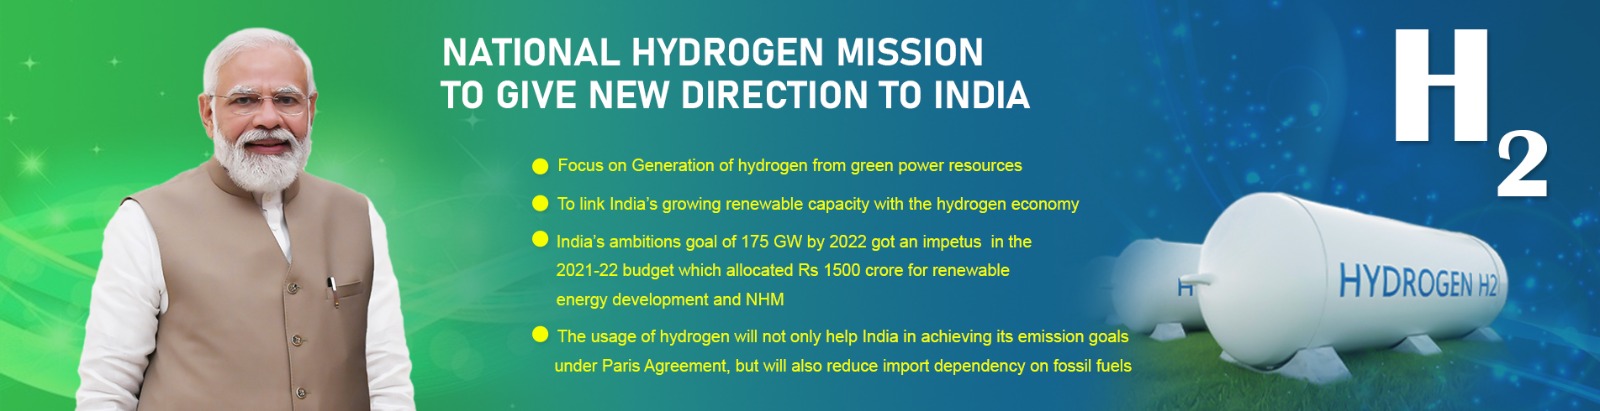 National Hydrogen Mission To Give New Direction To India